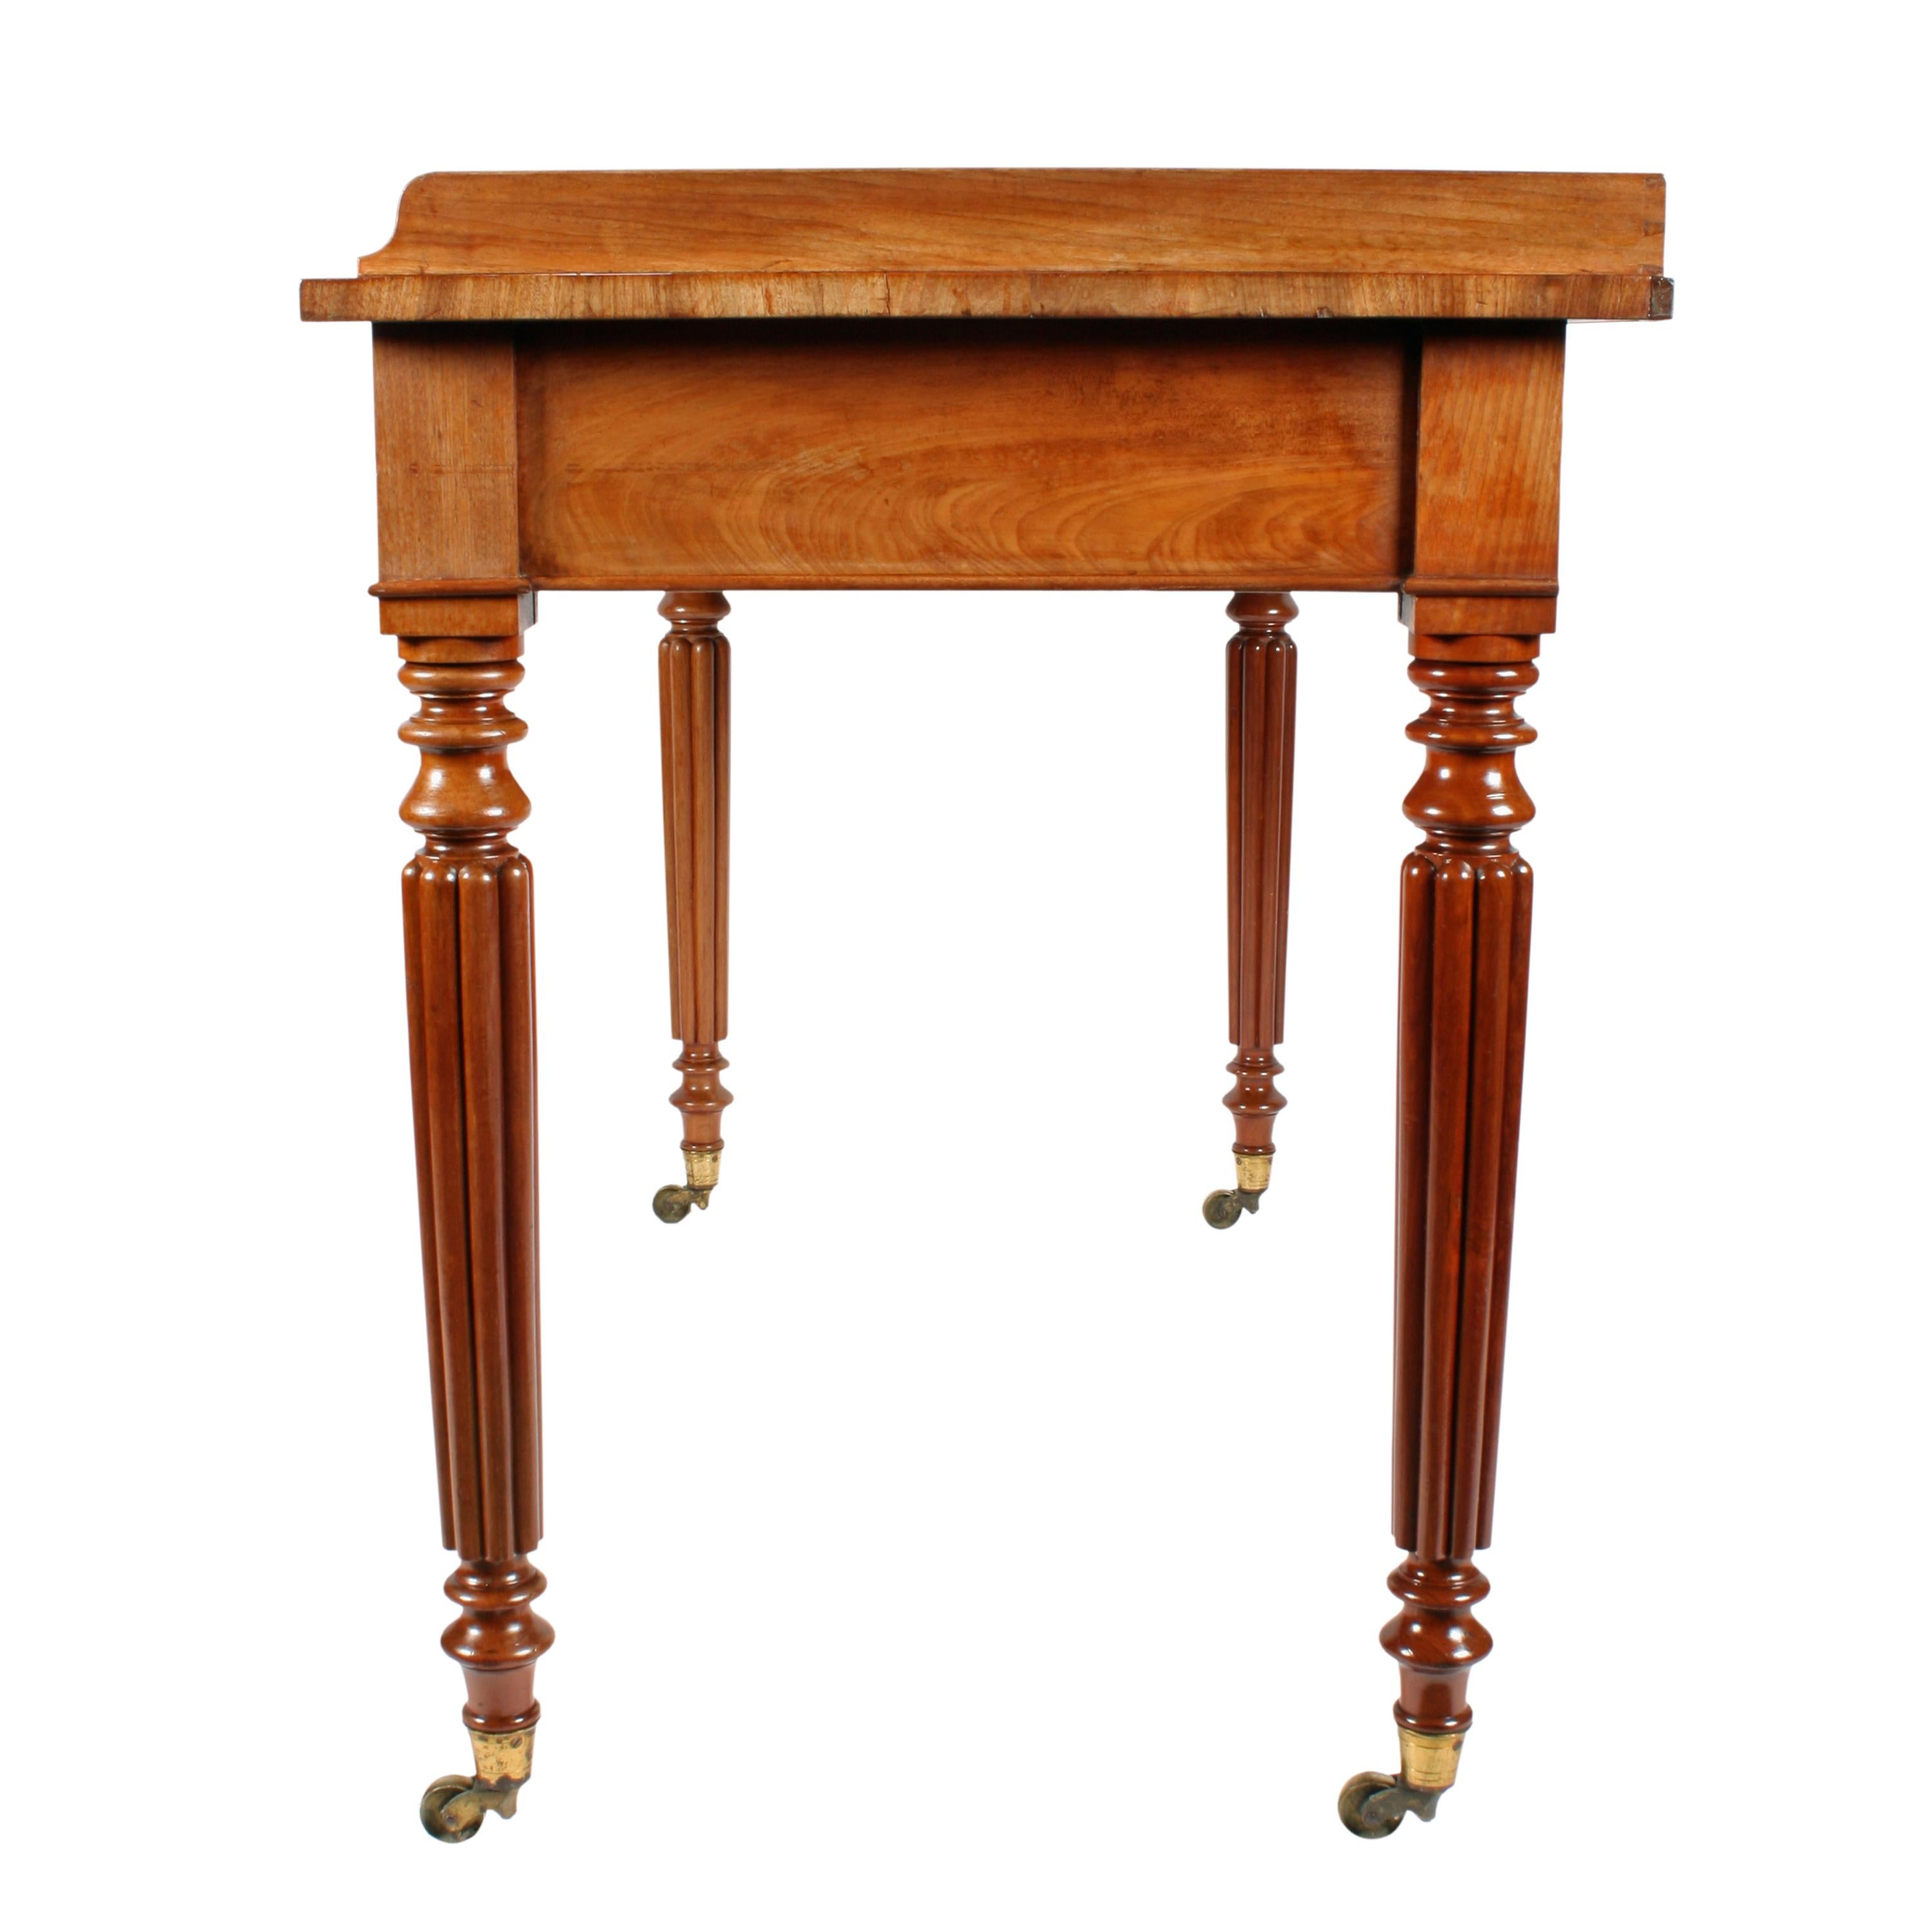 Early 19th Century Georgian 'Gillows' Design Side Table